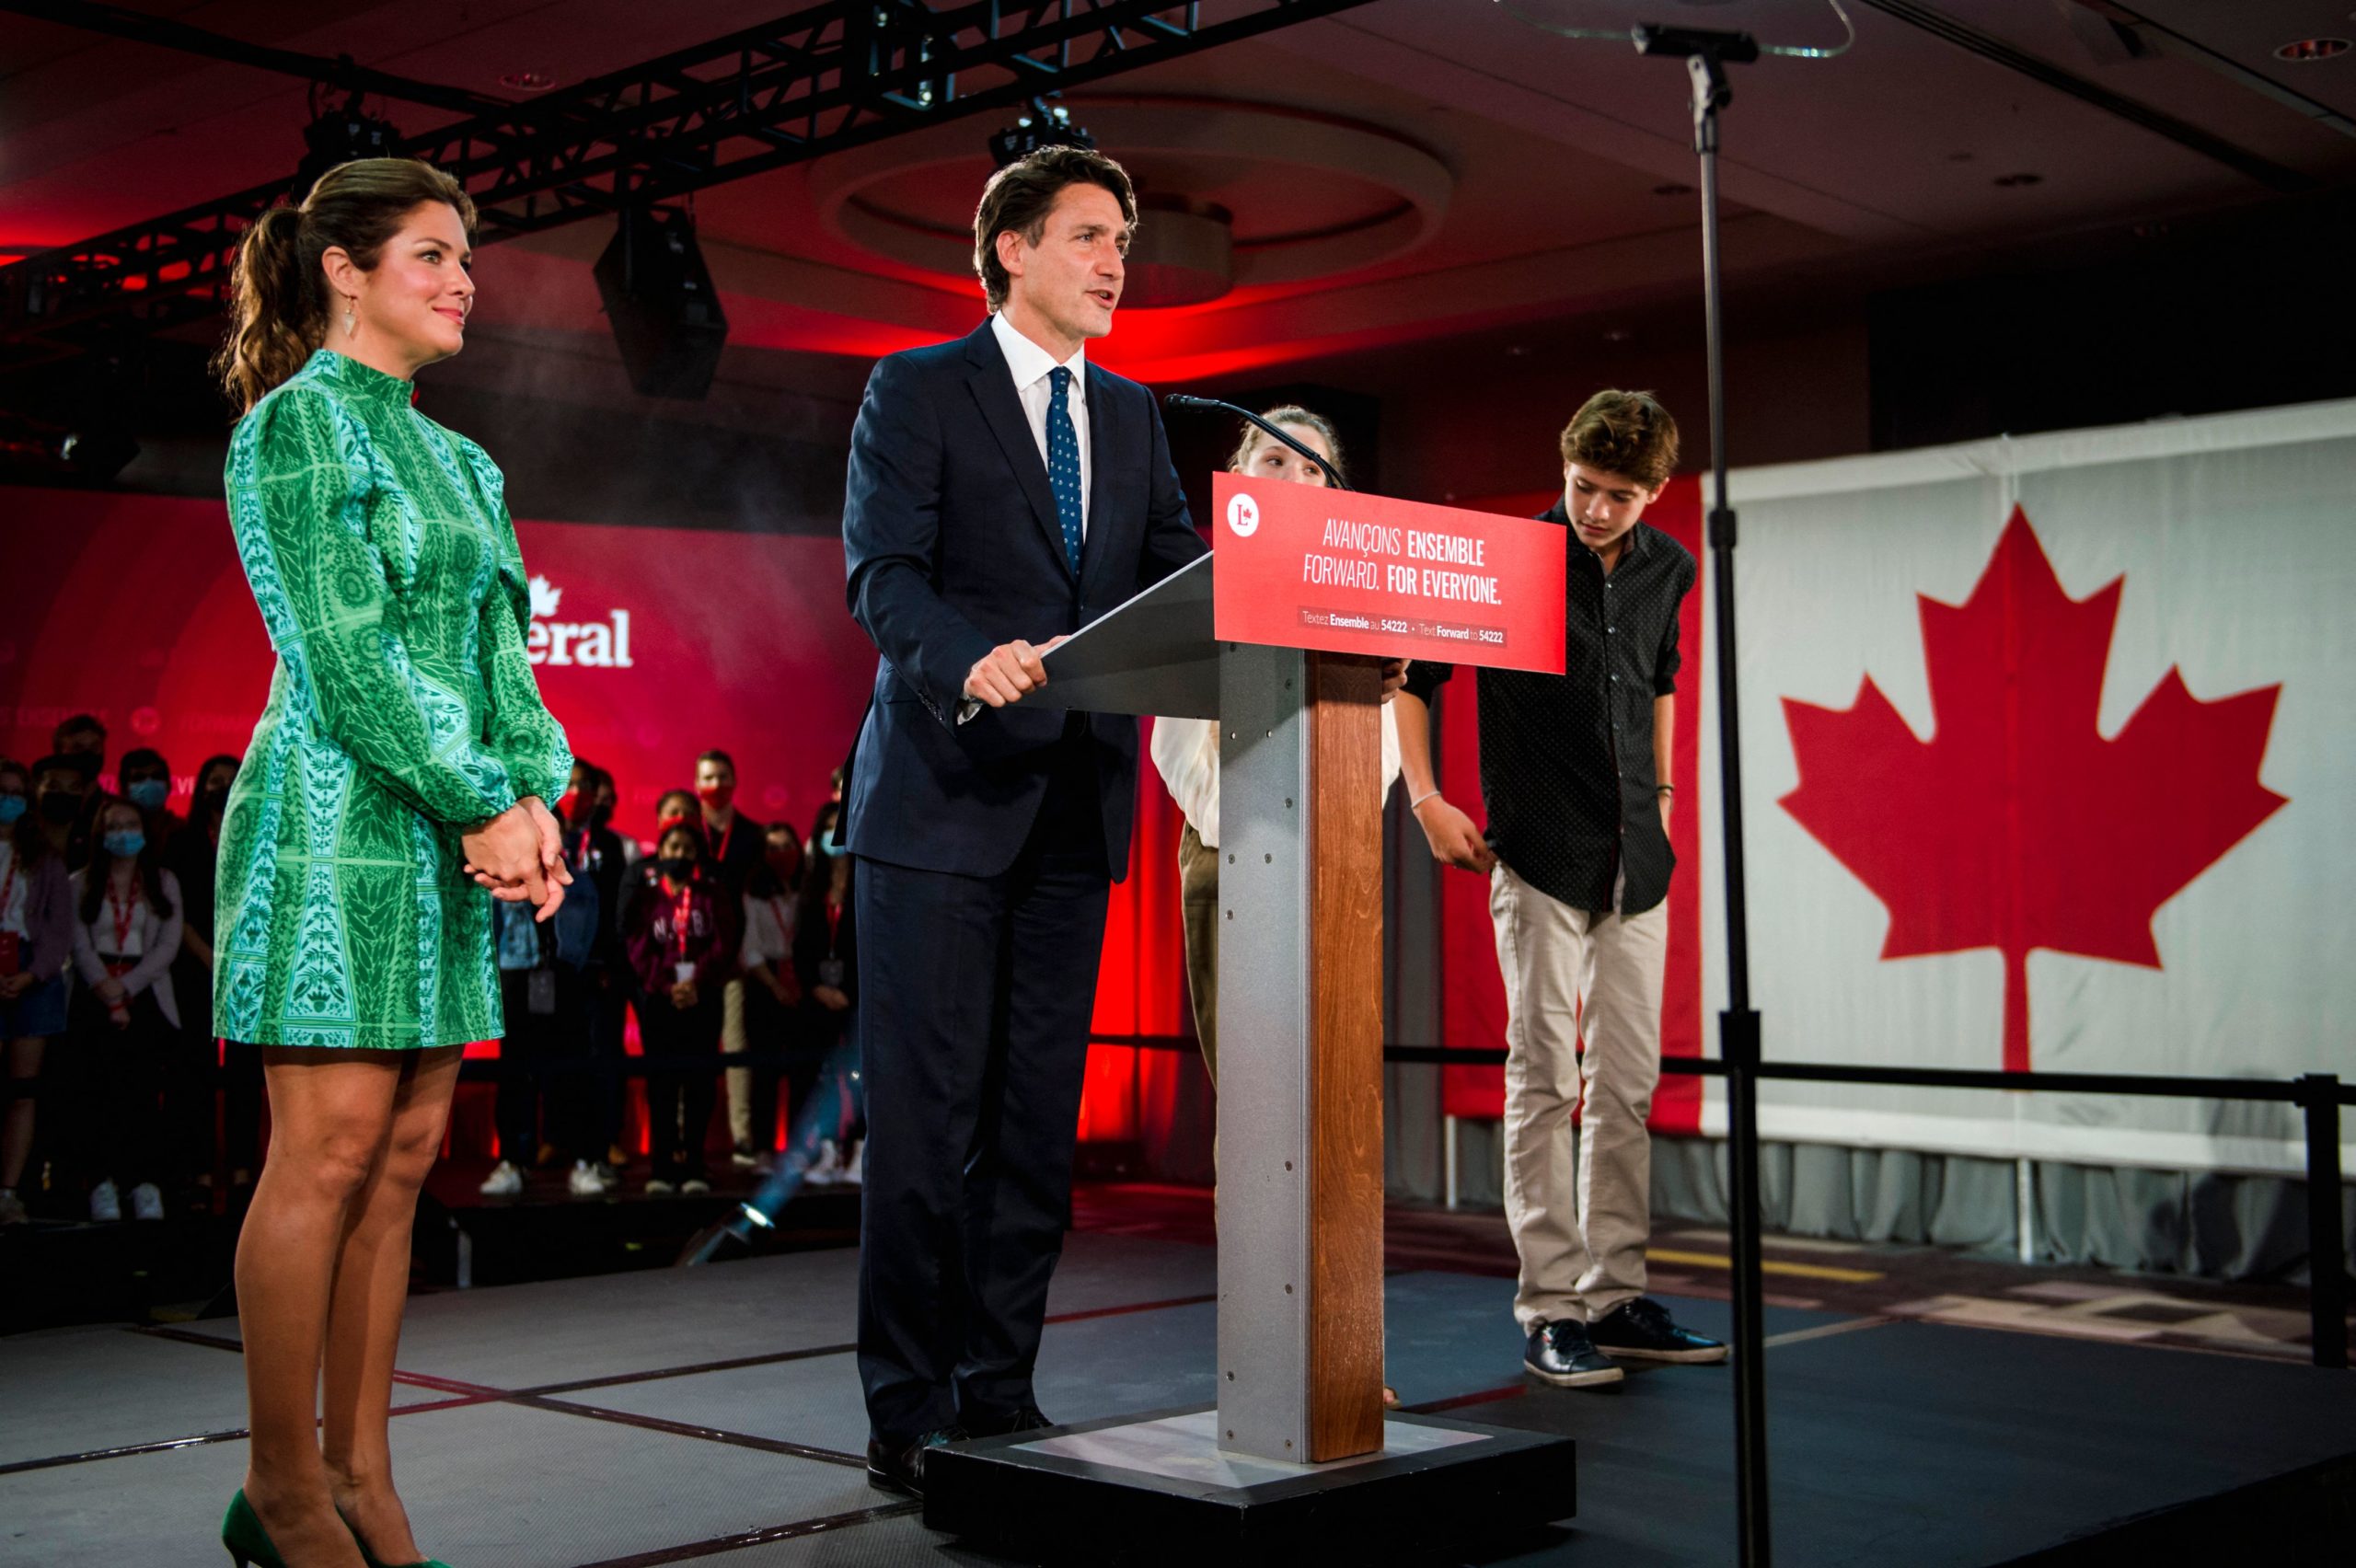 Canadian Prime Minister Justin Trudeau, flanked by wife Sophie Gregoire-Trudeau and children Ella-Grace and Xavier, delivers his victory speech after general elections at the Fairmount Queen Elizabeth Hotel in Montreal, Quebec, early on September 21, 2021. - Canadians returned Liberal Prime Minister Justin Trudeau to power on September 20 in hotly contested elections against a rookie conservative leader, but he failed to gain an absolute majority, according to projections by television networks. (Photo by ANDREJ IVANOV/AFP via Getty Images)